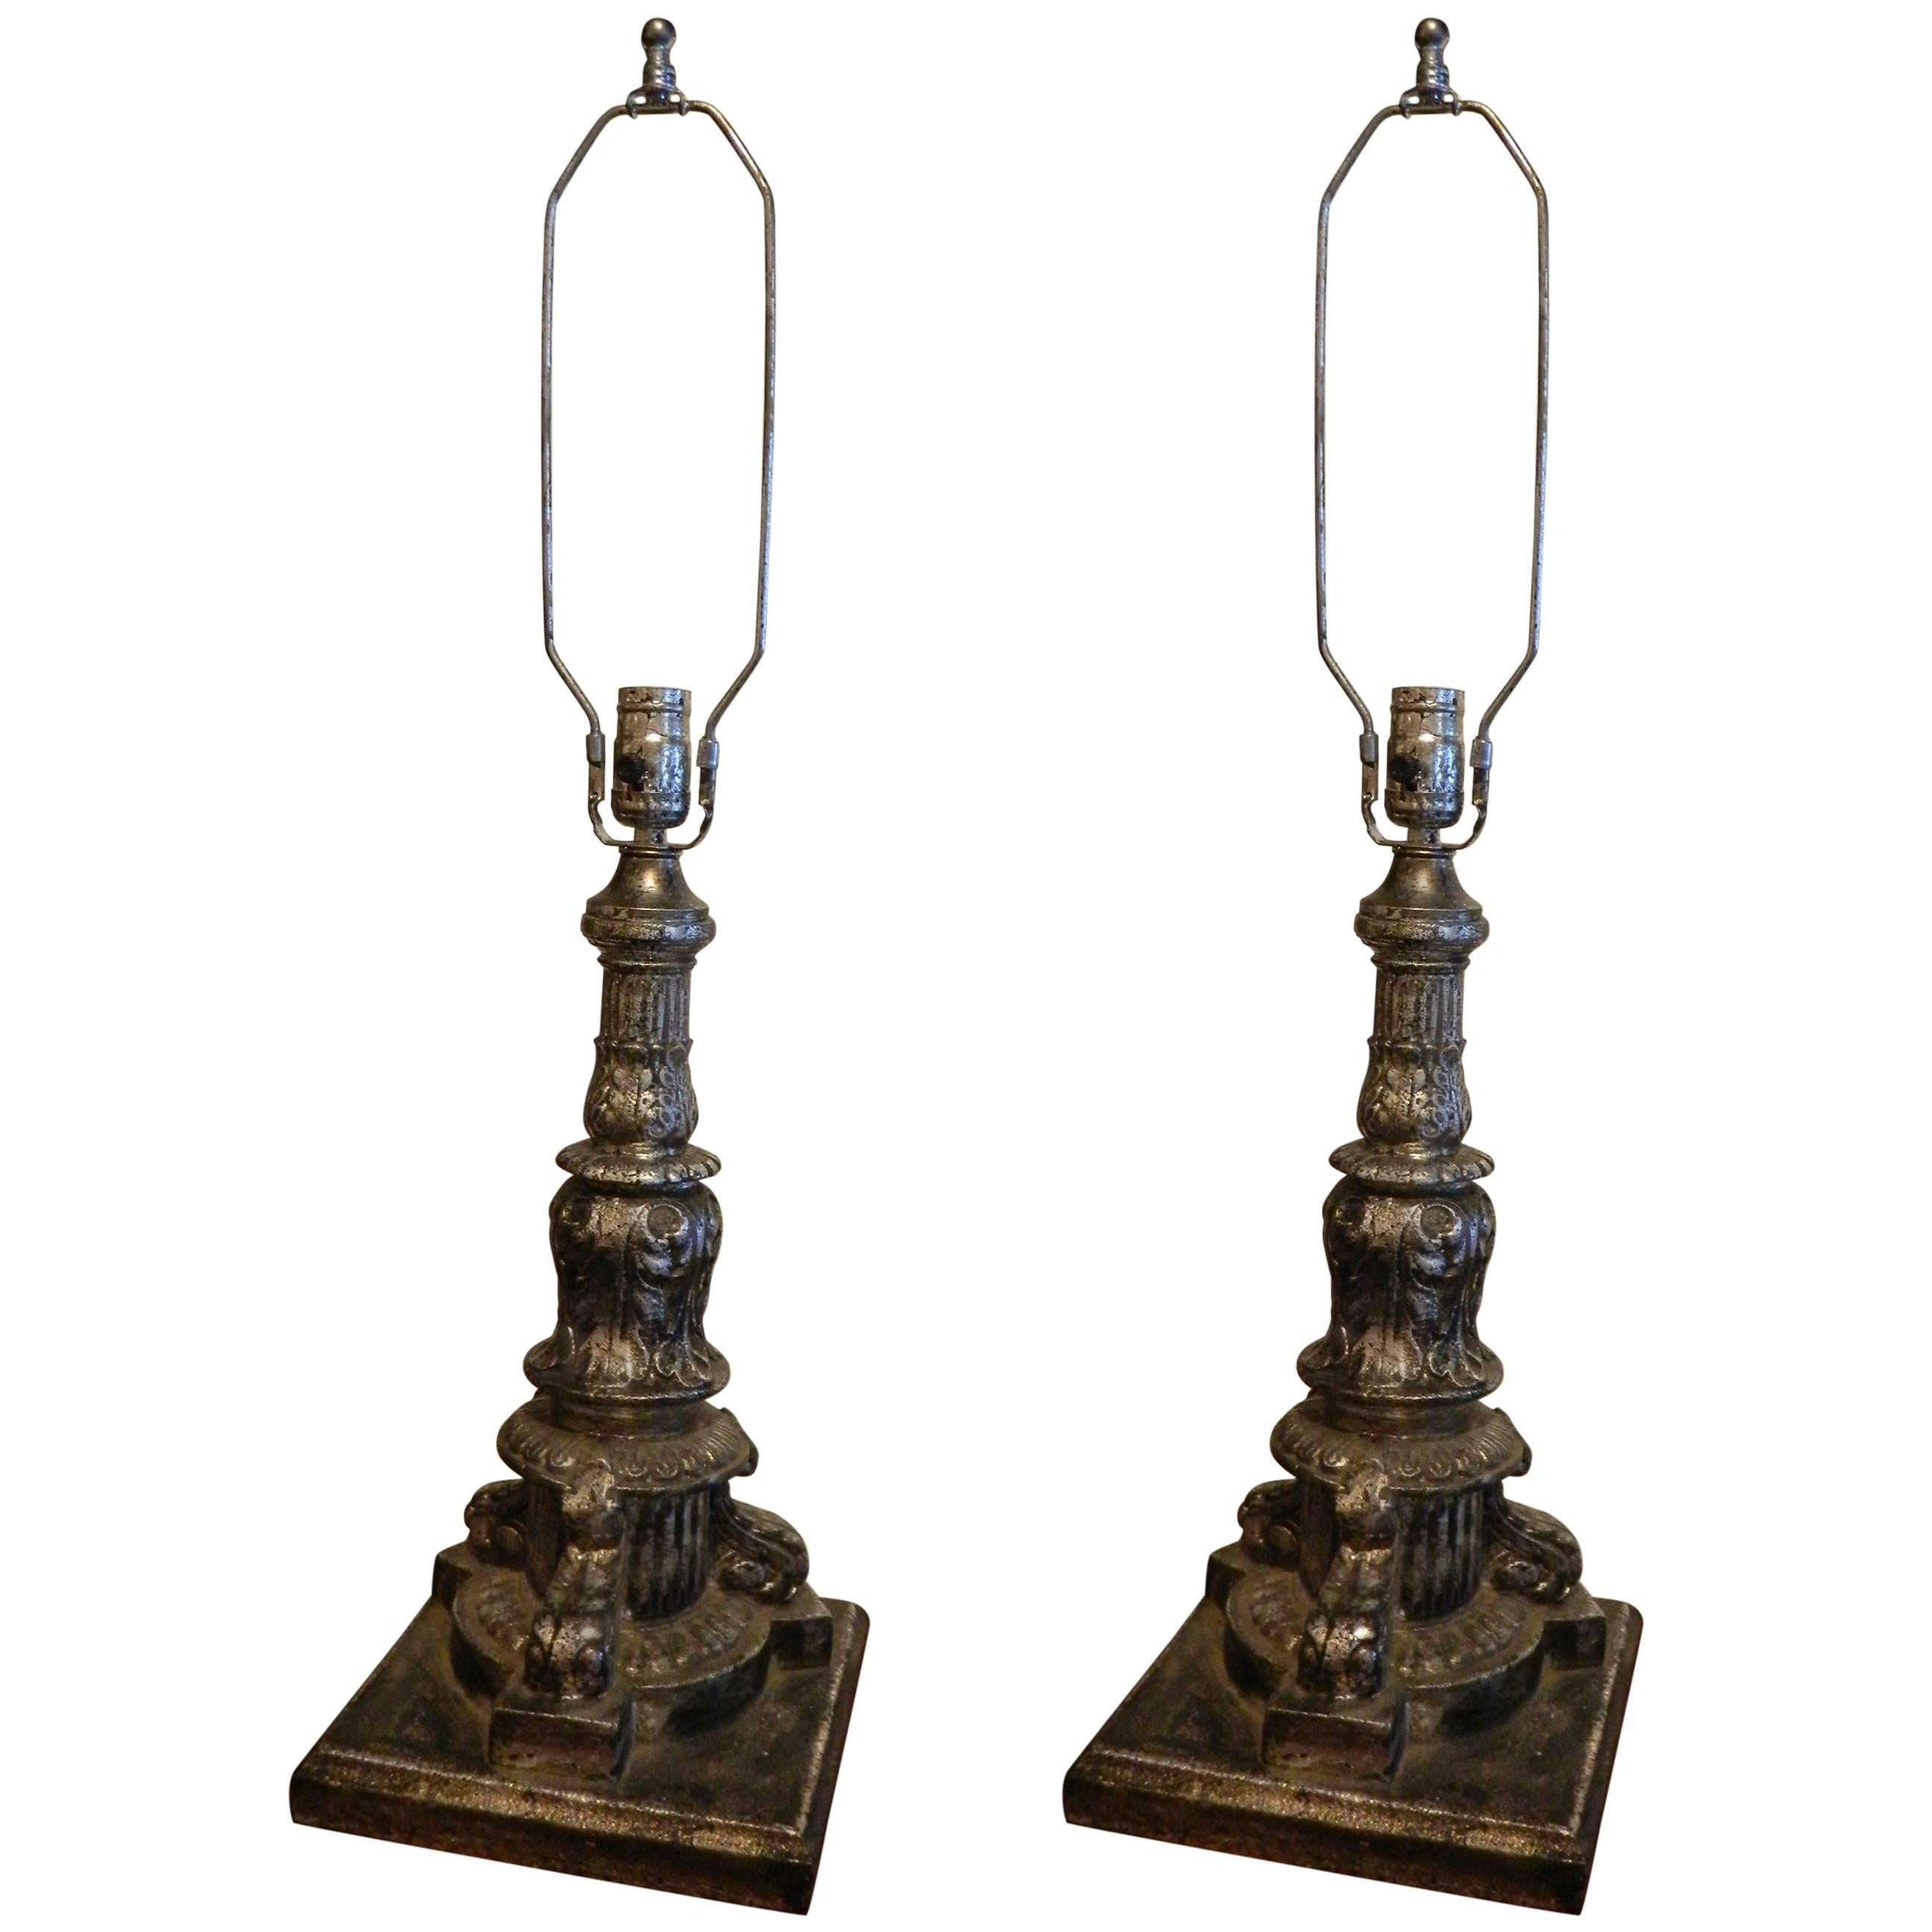 Pair of Iron Silver Leaf Architectural Elements Adapted as Lamps, 19th Century For Sale